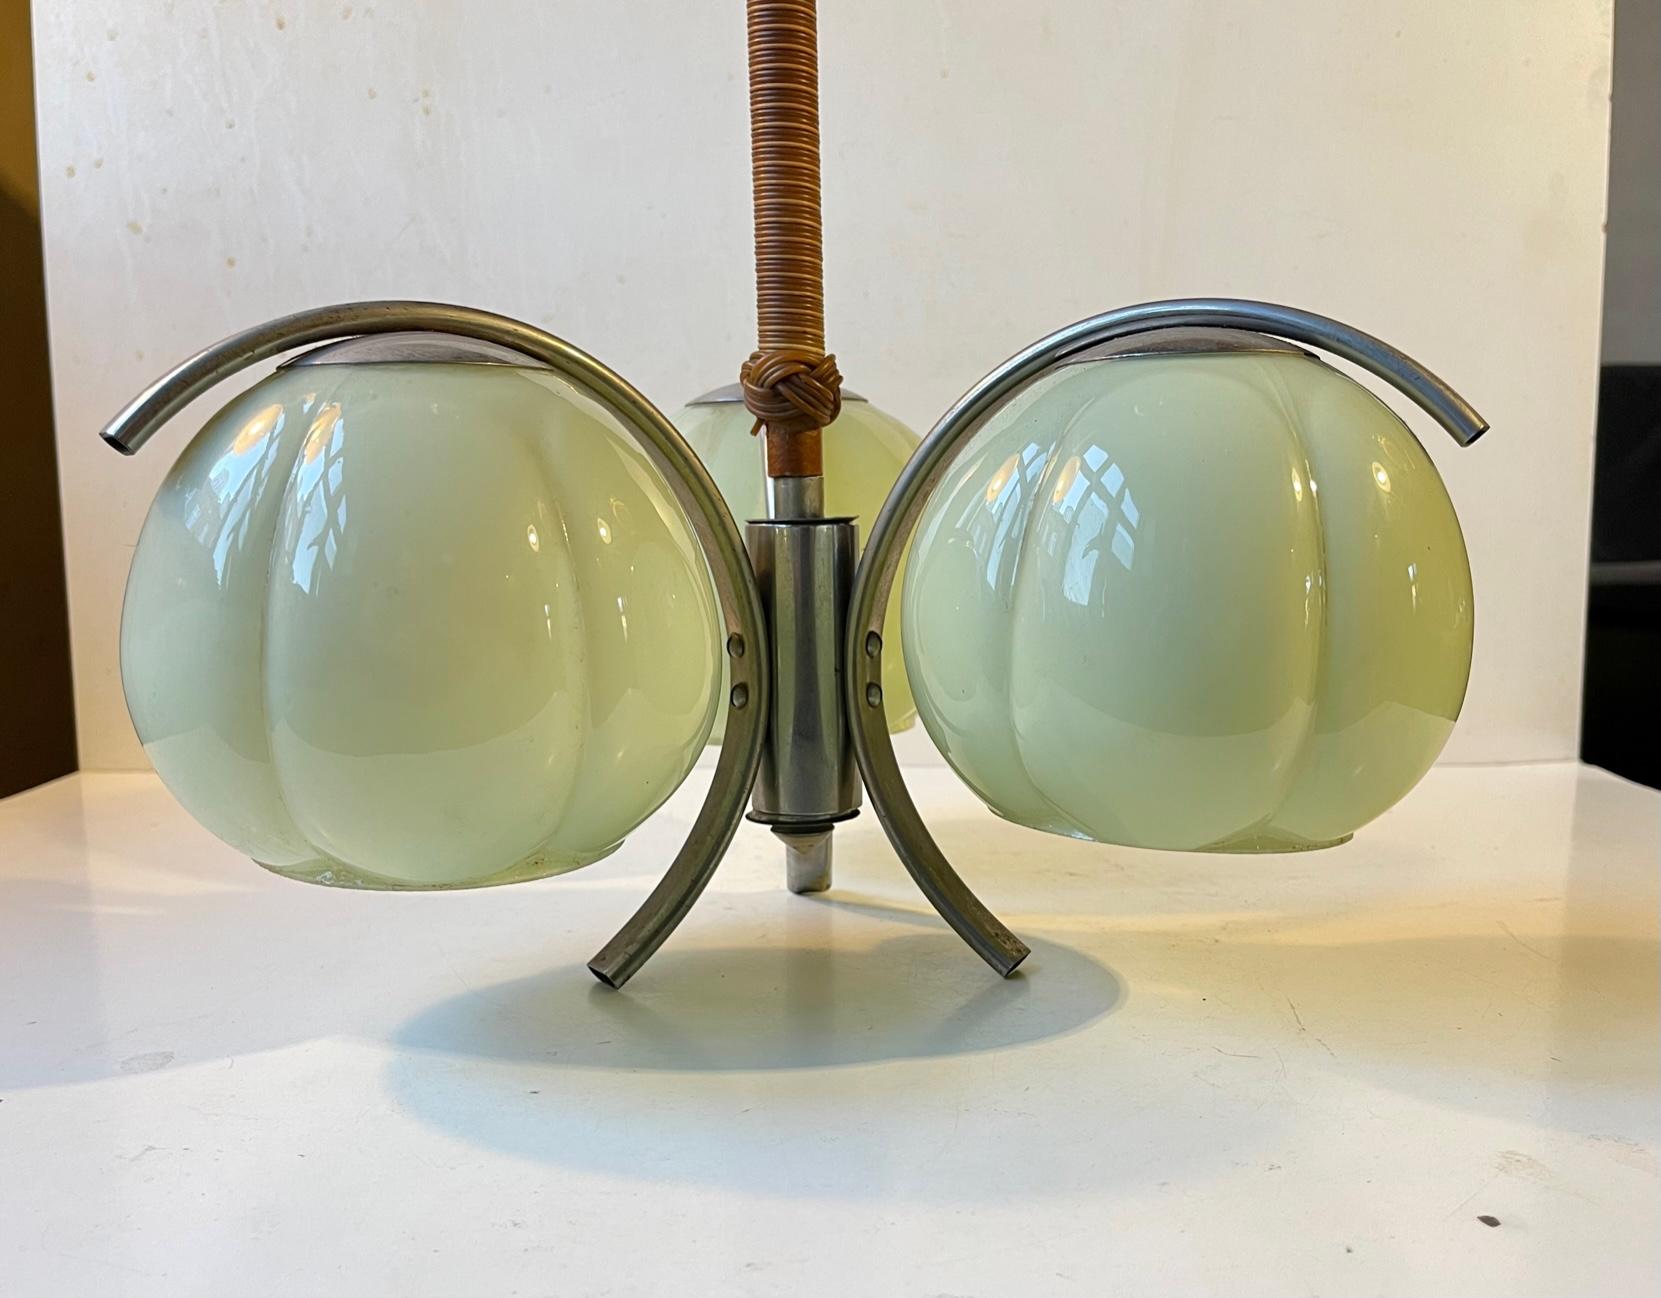 3-Armed Bauhaus Ceiling Light with Light Green Shades, Germany, 1930s For Sale 2